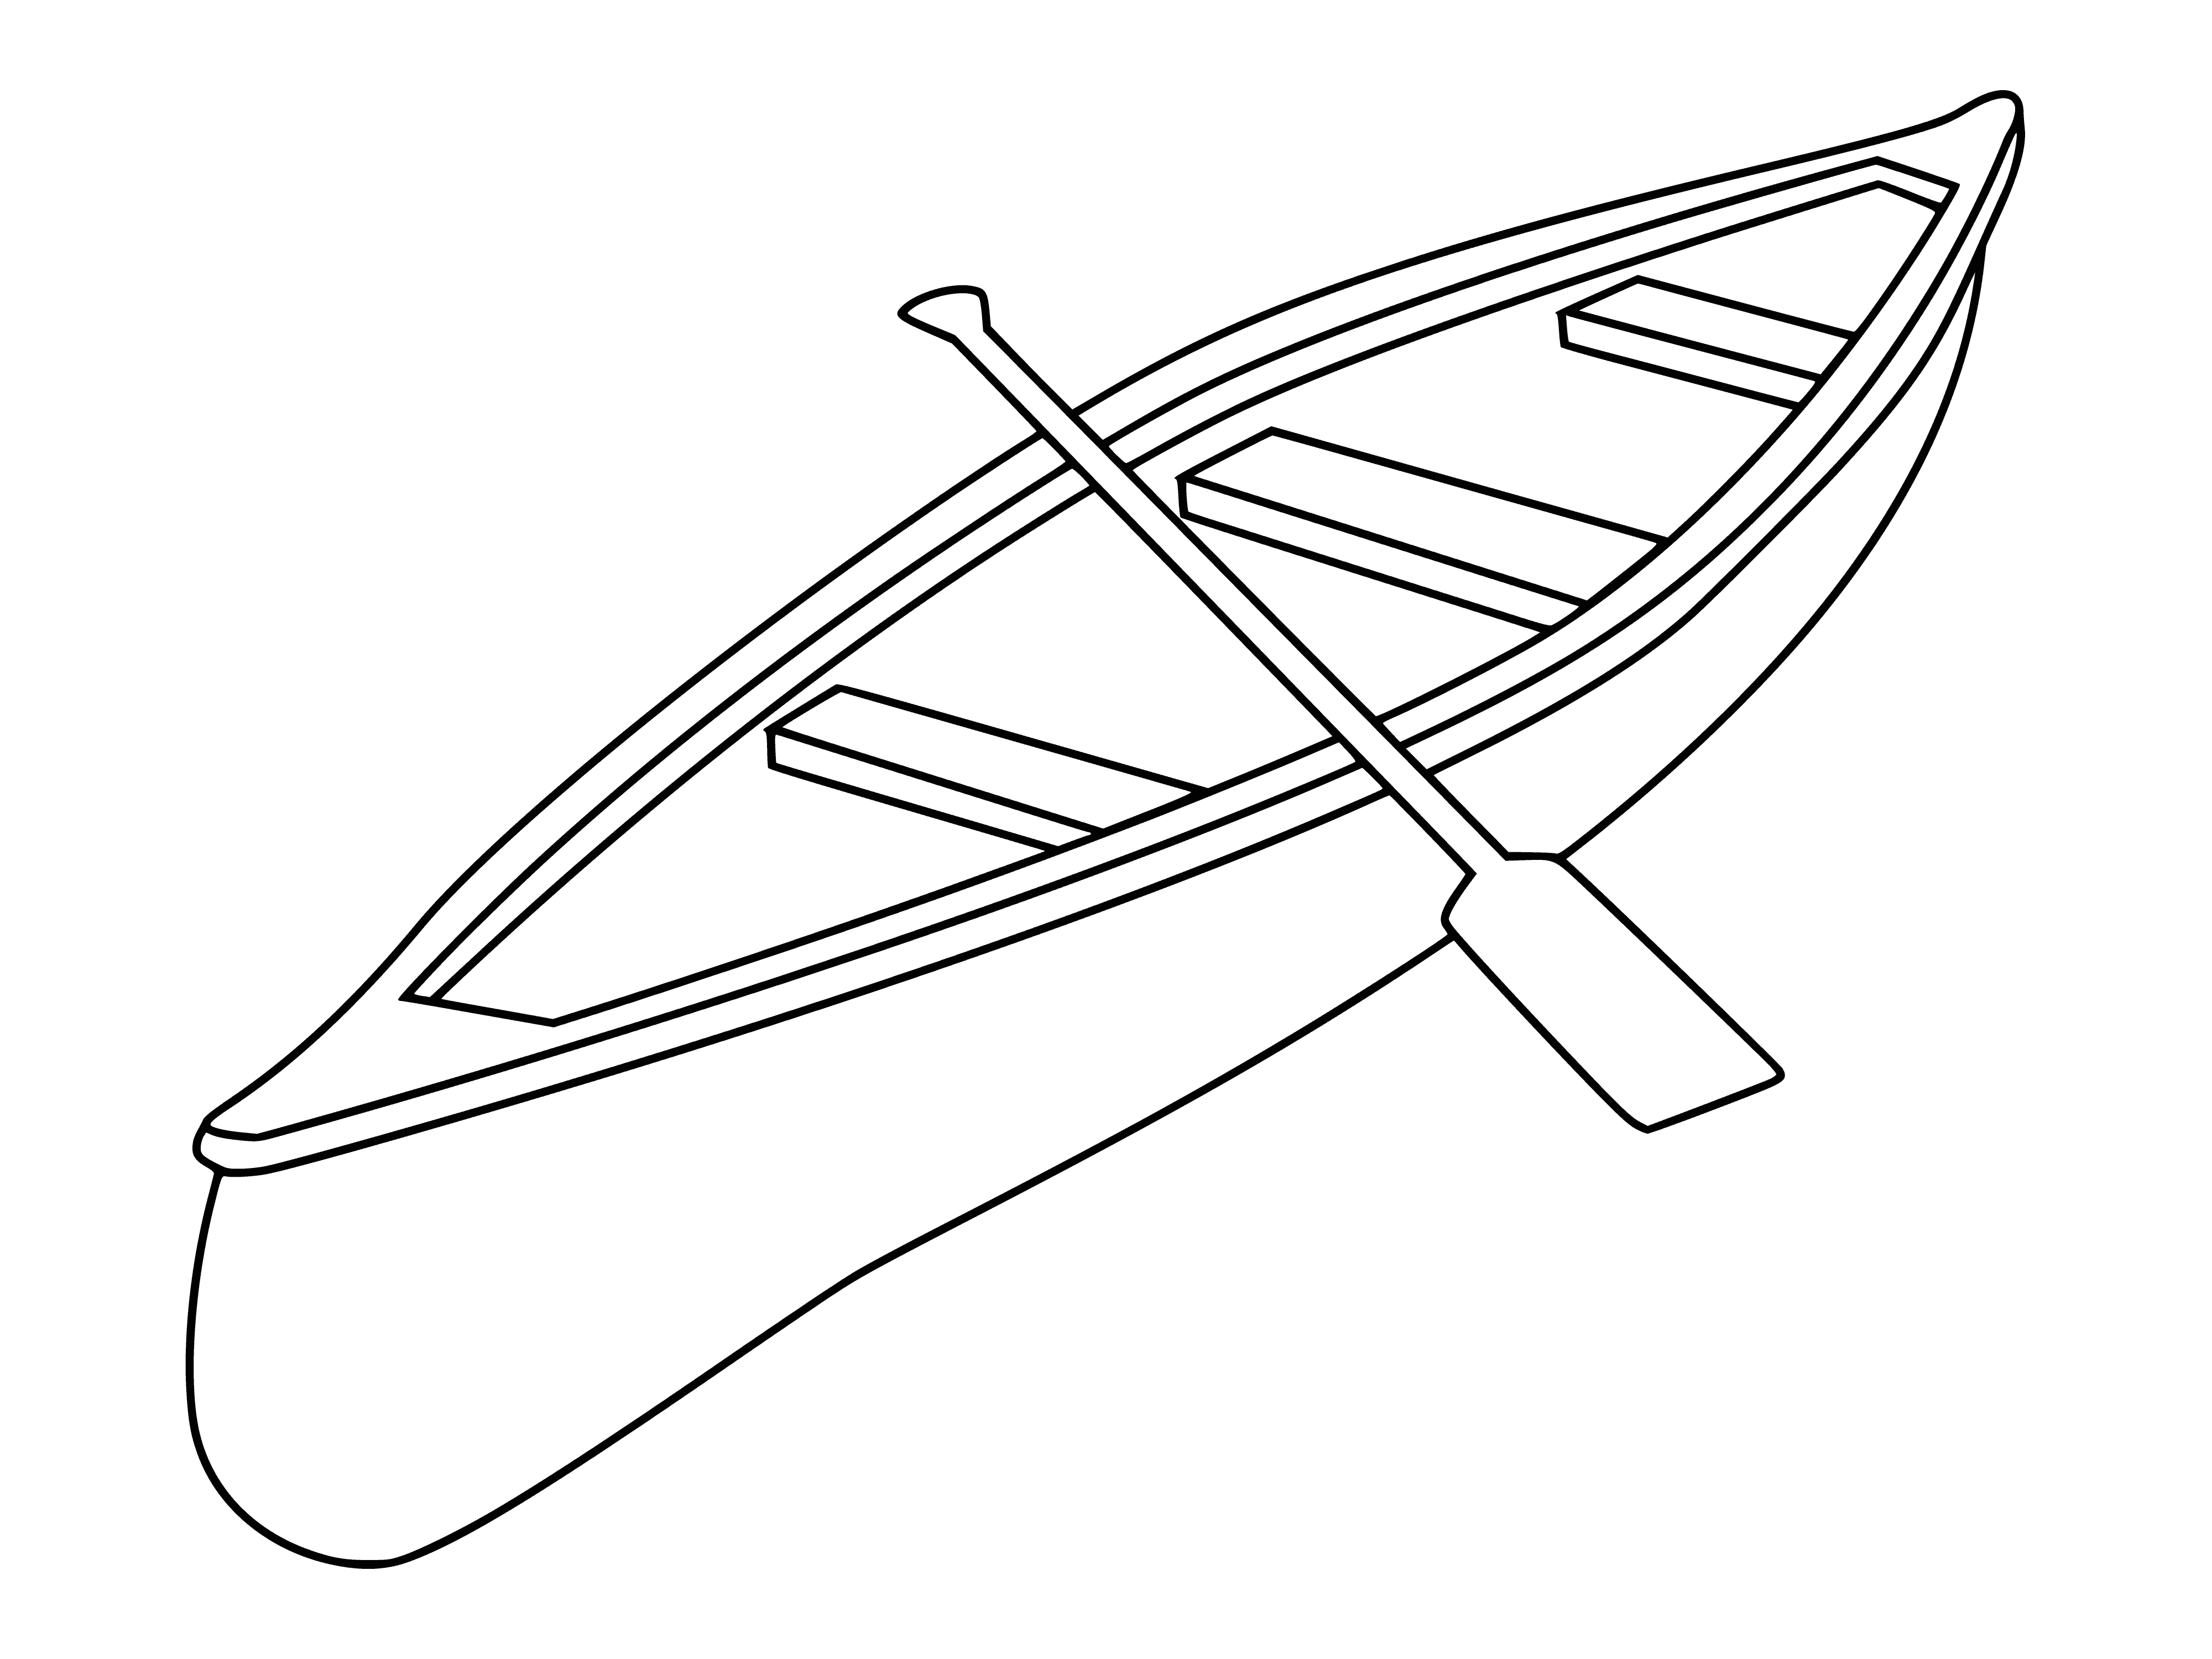 coloring page: Two in a small rowboat, one rowing, one in front. Peaceful body of still water.